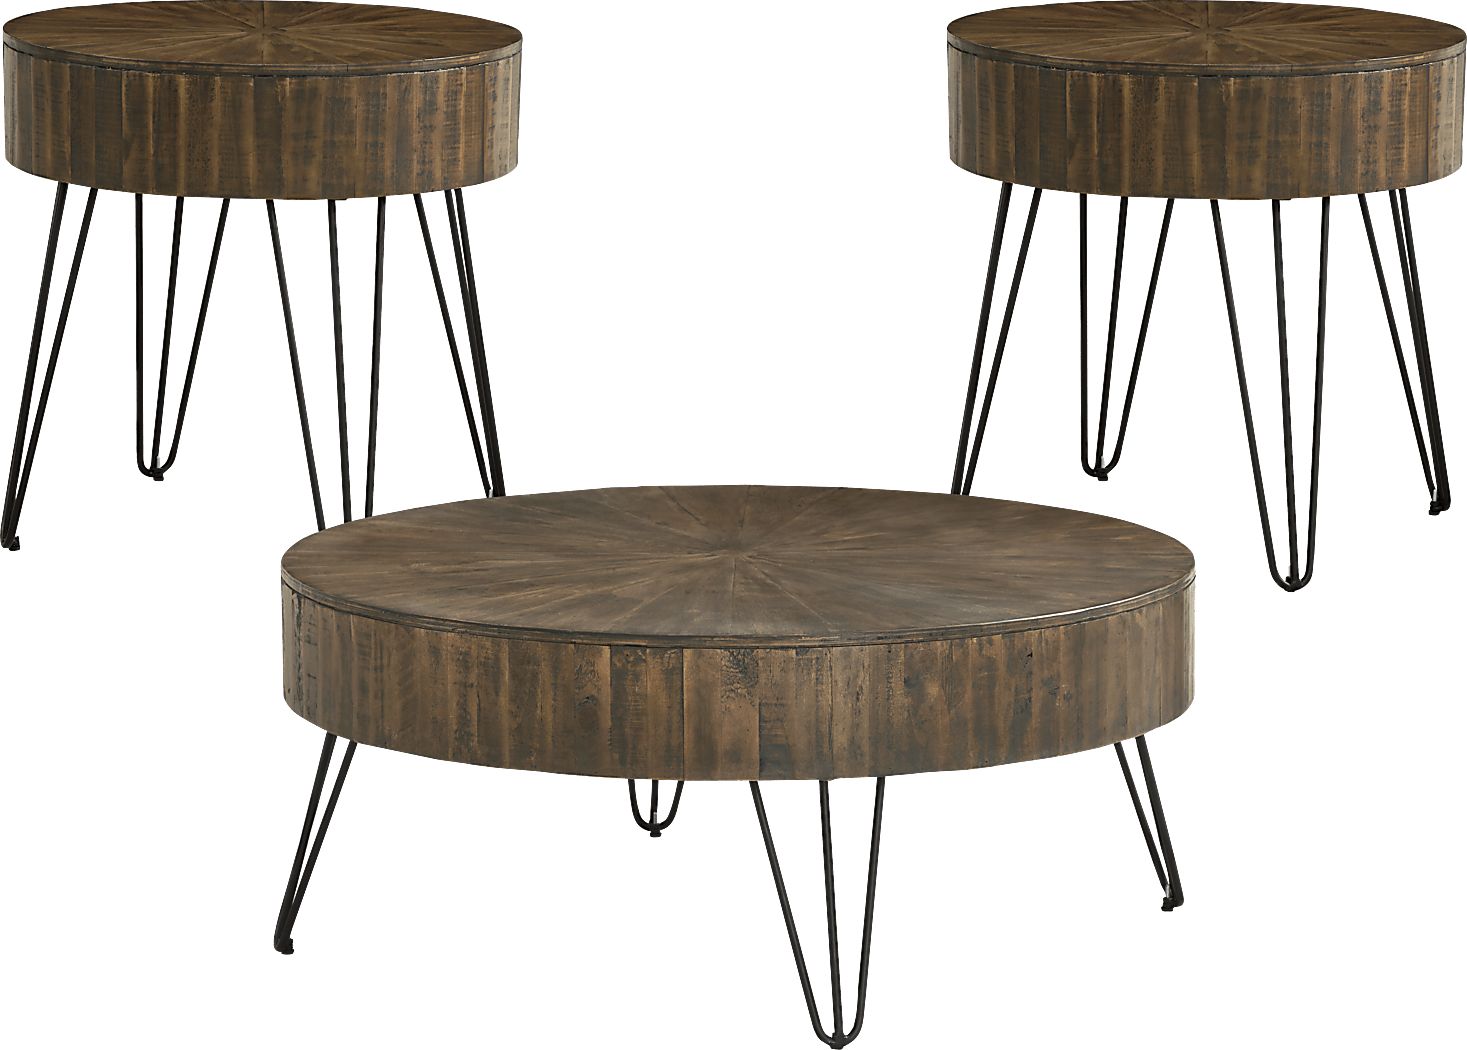 Del Sol Brown 3 Pc Round Occasional Table Set